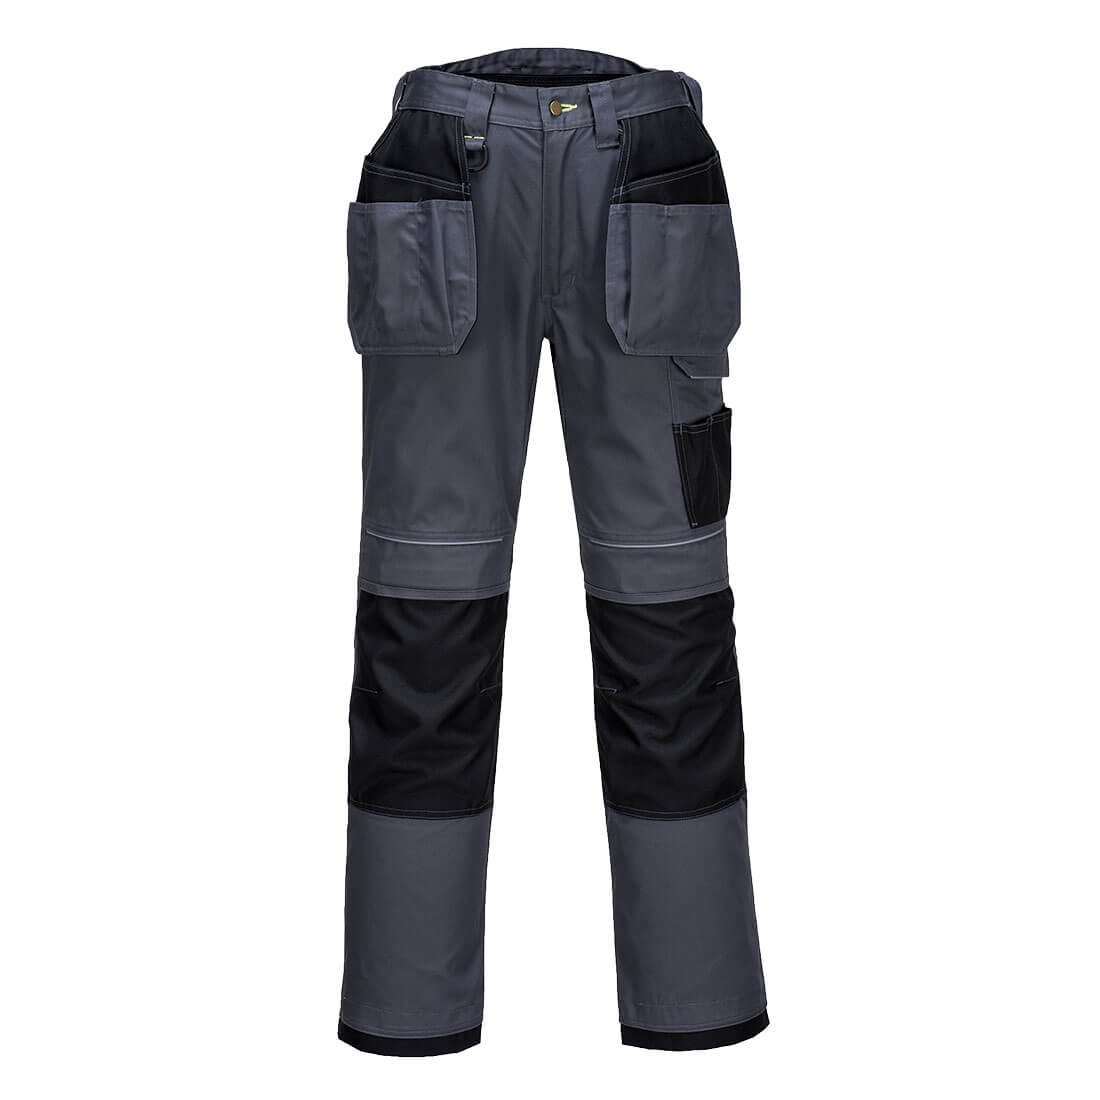 Photo of Pw3 Mens Urban Holster Work Trousers Grey / Black 28